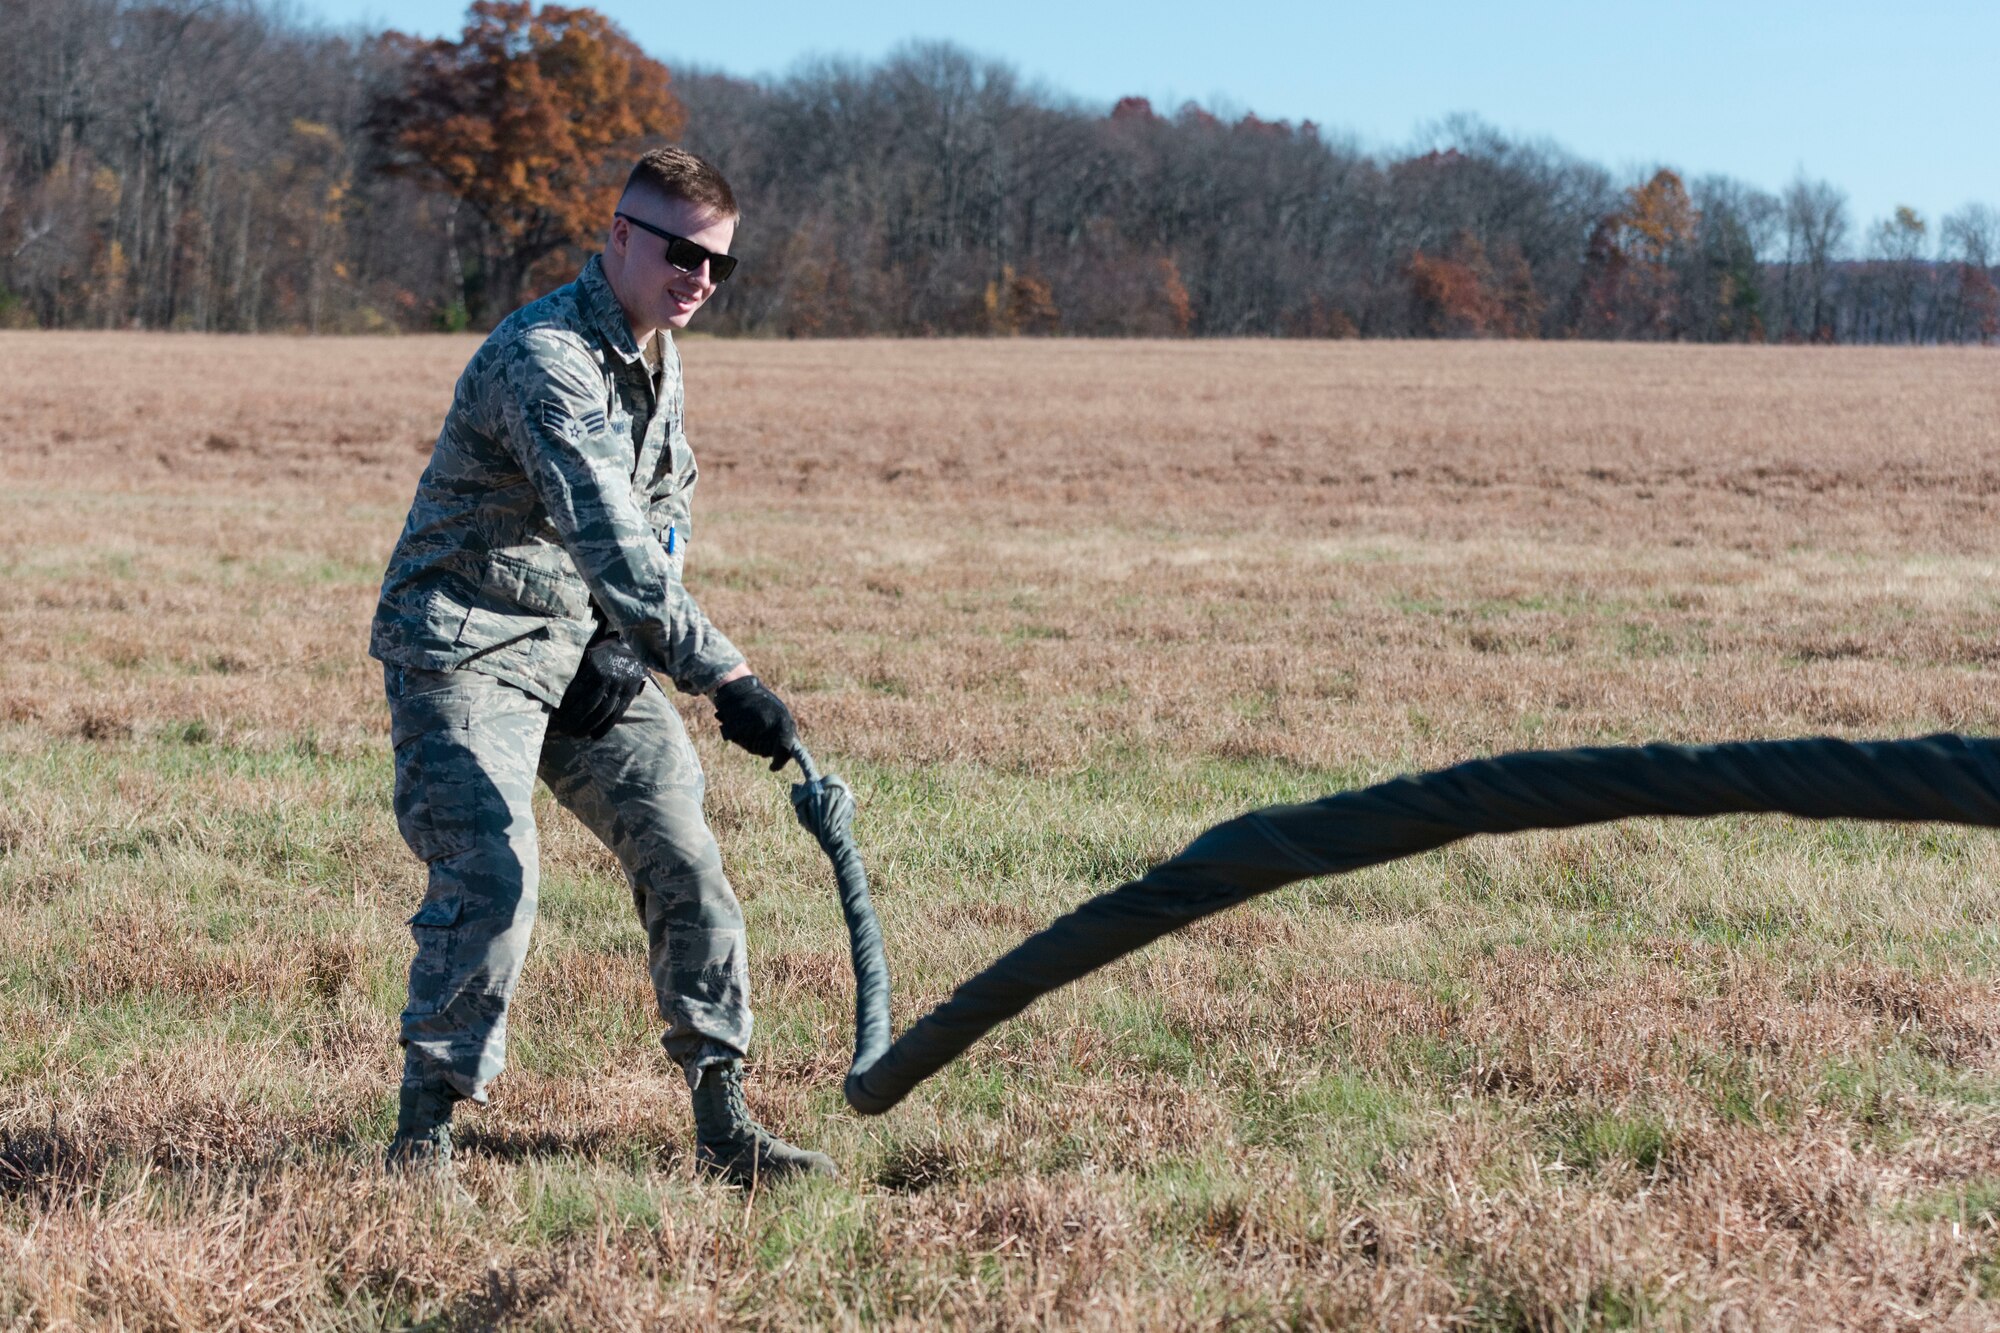 Senior Airman Sean Manierre, 103rd Logistics Readiness Squadron air transportation specialist, repacks a parachute after an airdrop at Westover Air Reserve Base, Chicopee, Mass. Nov. 2, 2019. The parachute used for the air drop is part of a low-cost, low-altitude pallet and can be thrown away after use. (U.S. Air National Guard photo by Airman 1st Class Chanhda Ly)